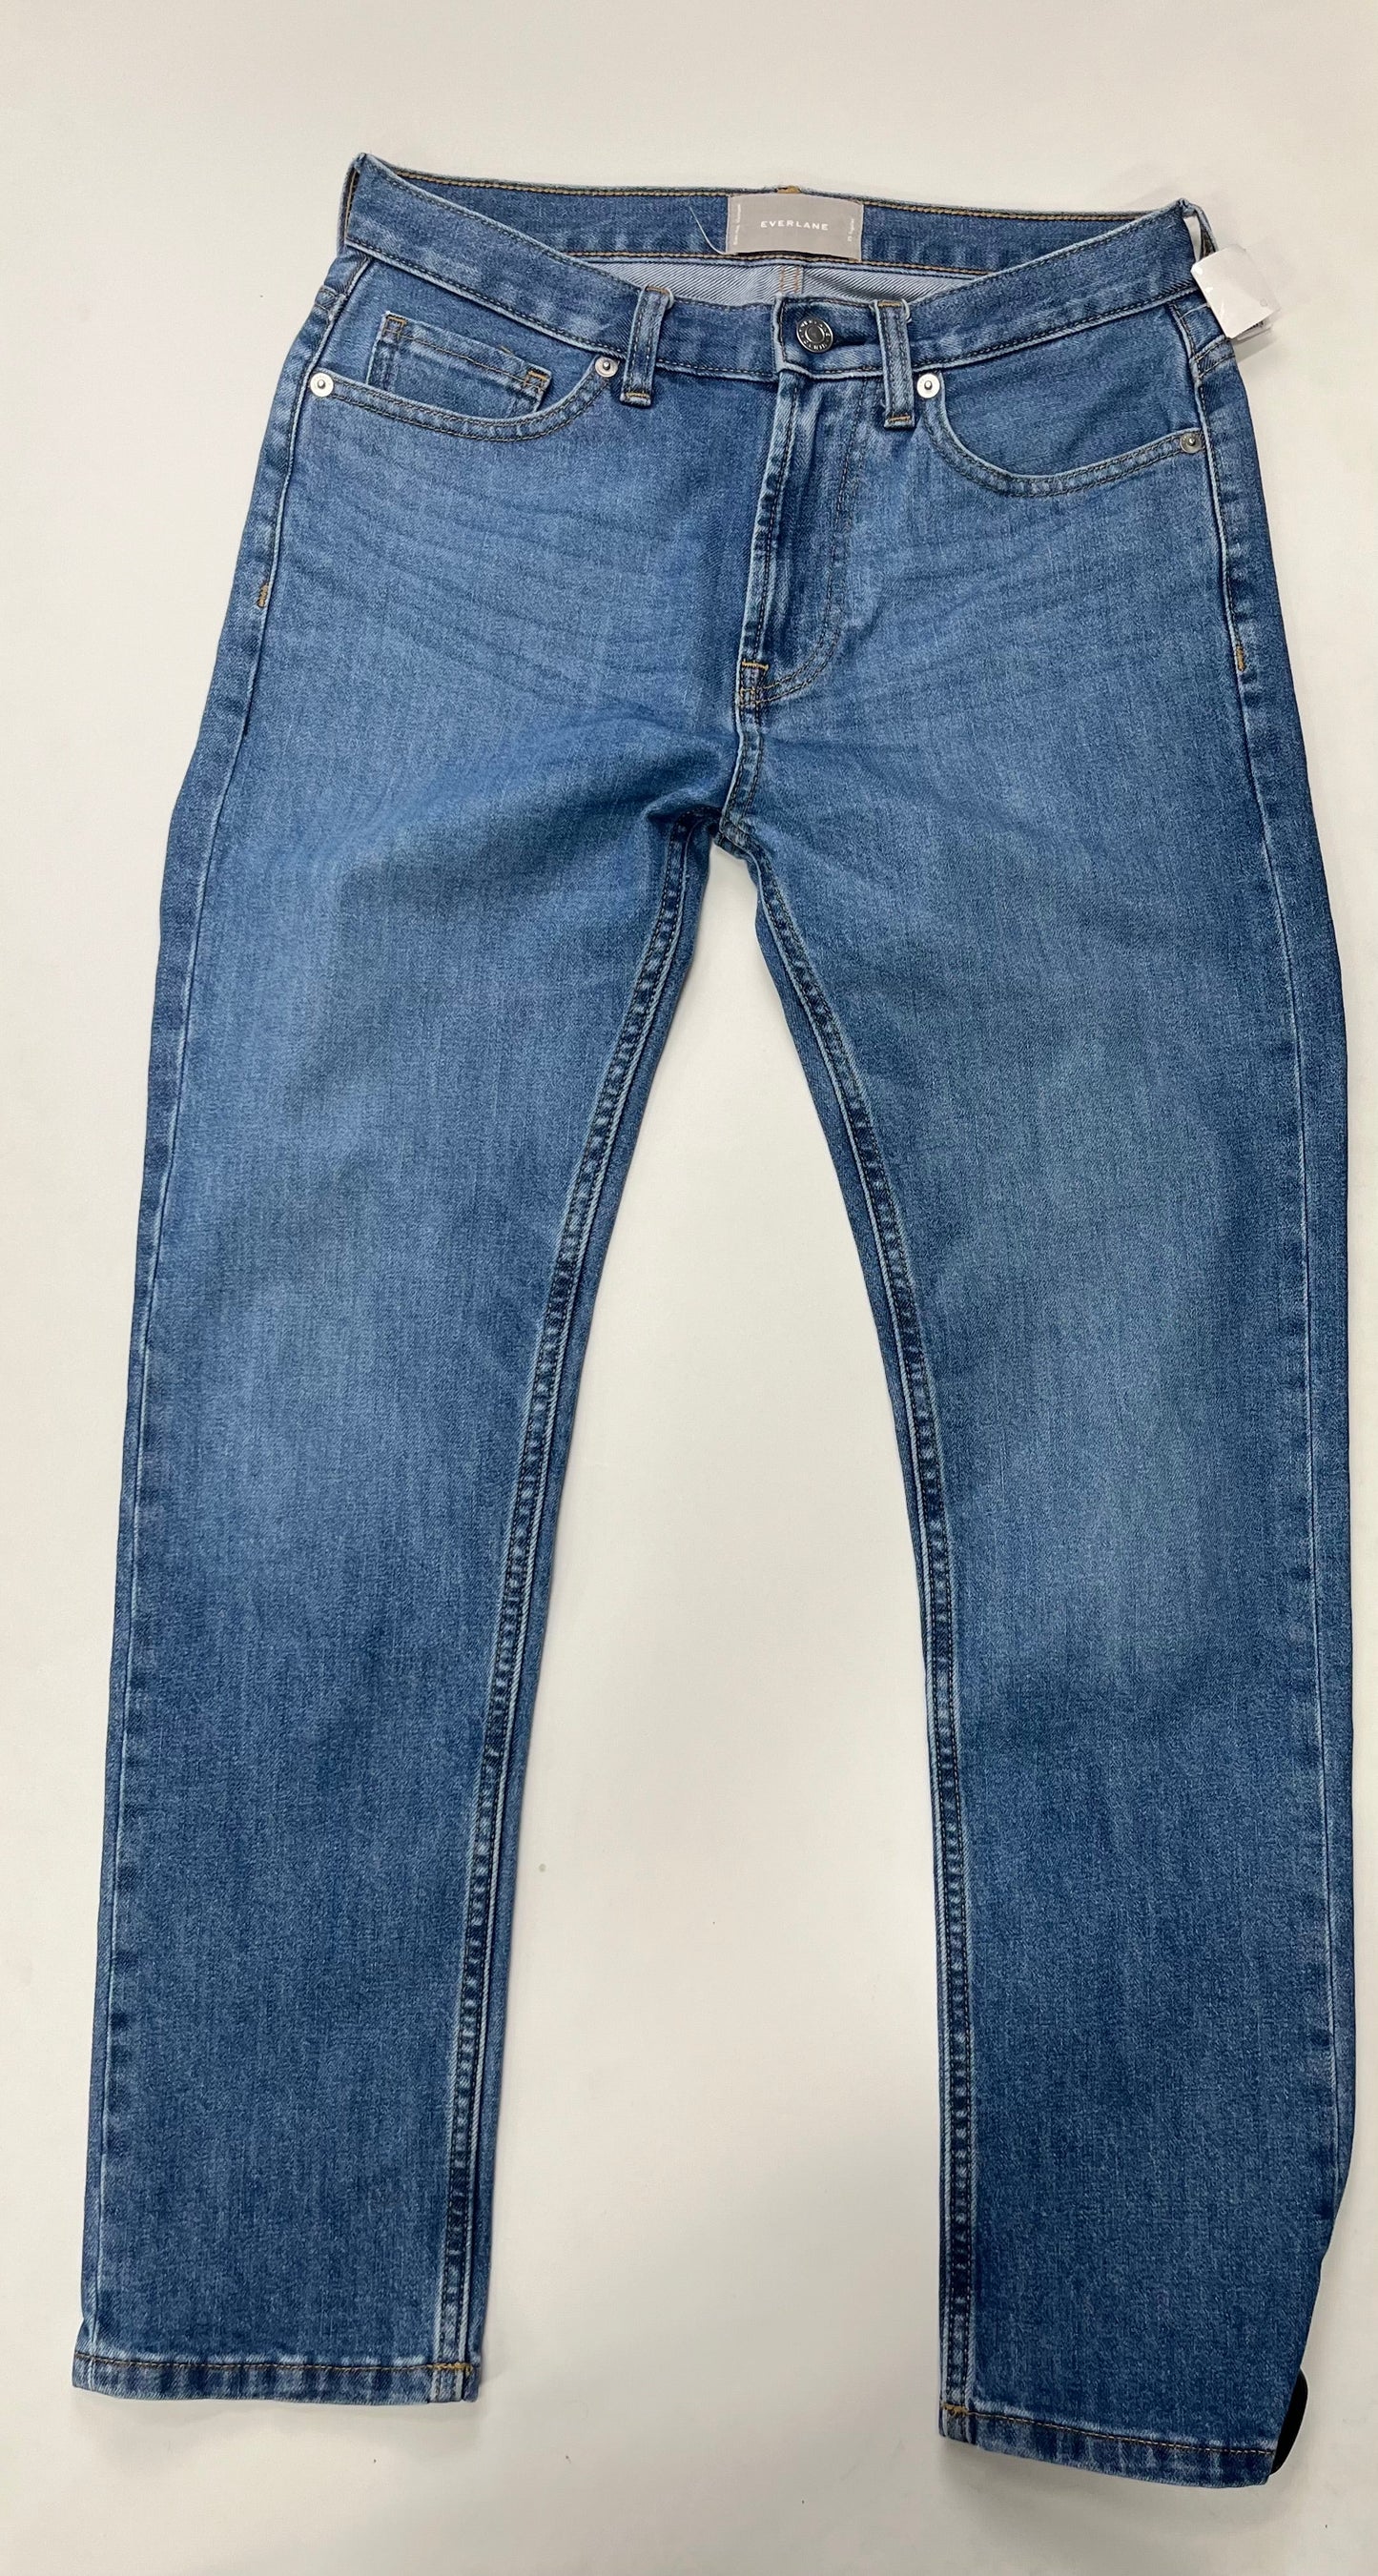 Jeans Skinny By Everlane  Size: 2